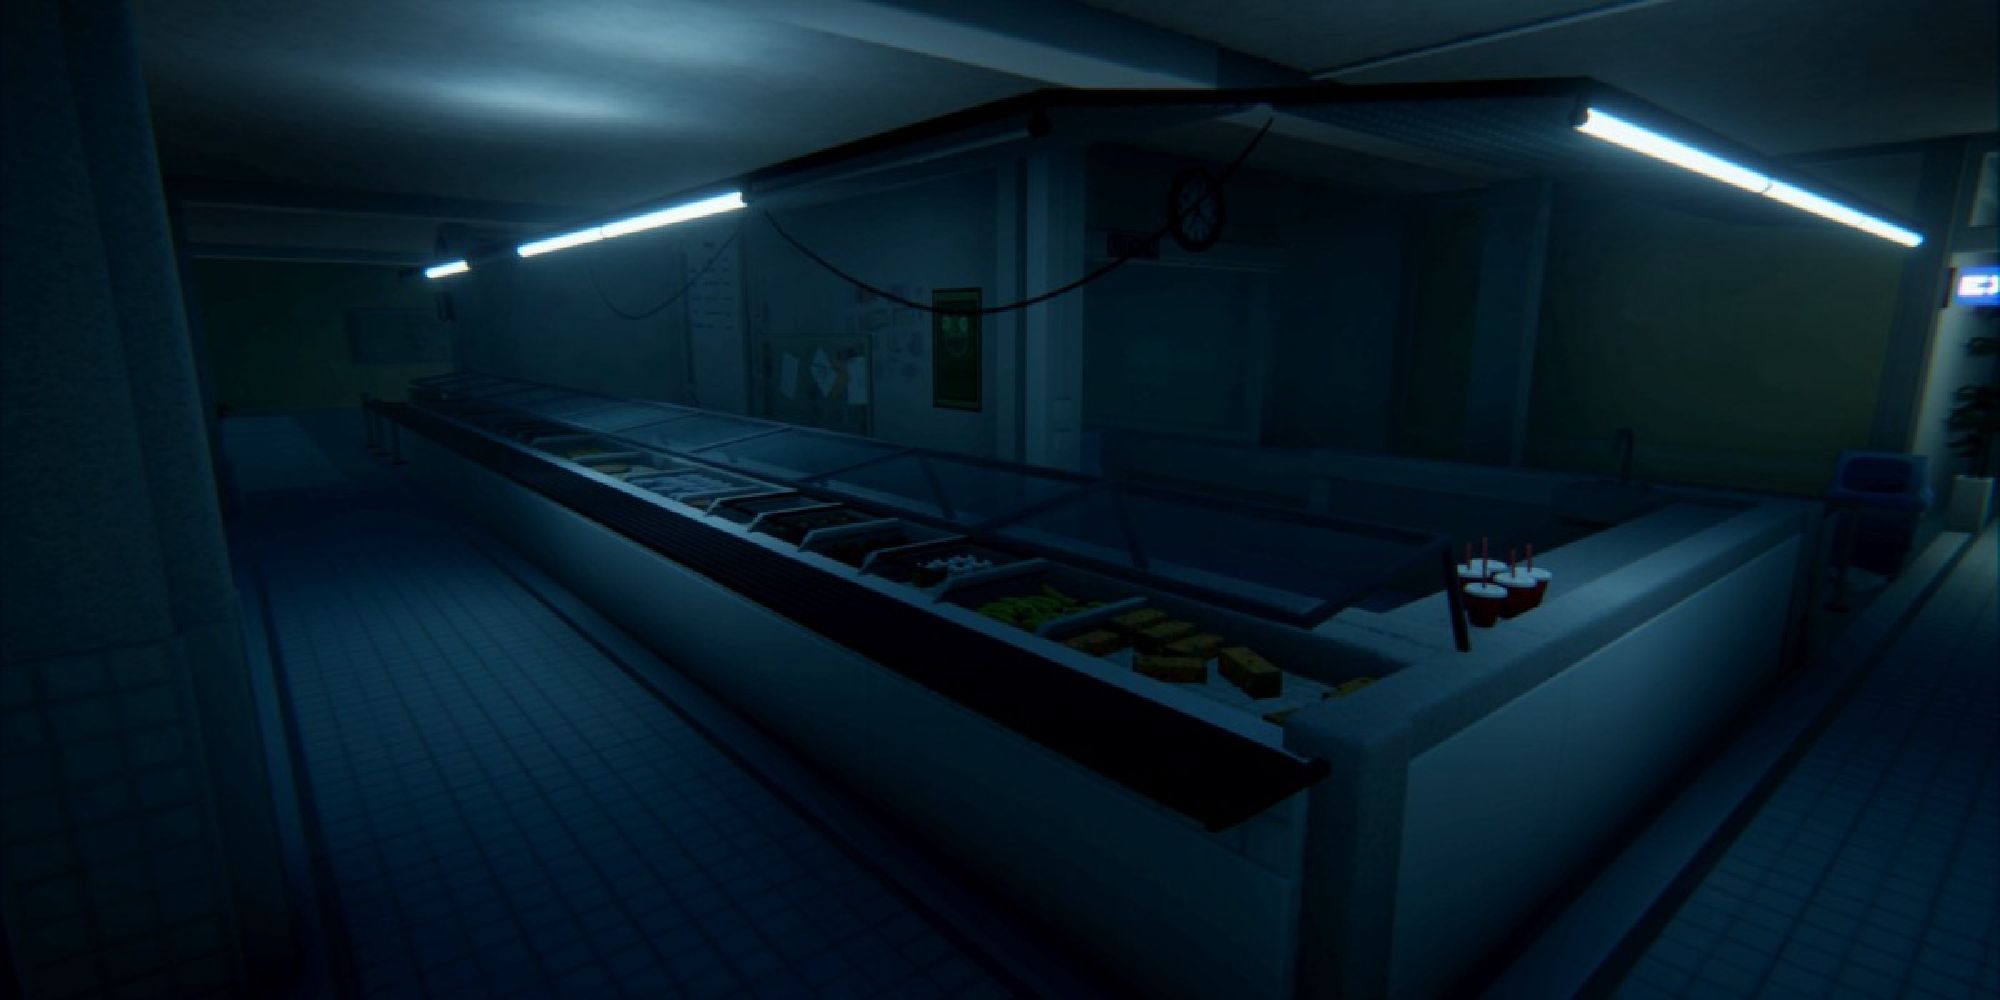 A dark and desolate kitchen from Beyond the Nightmare.